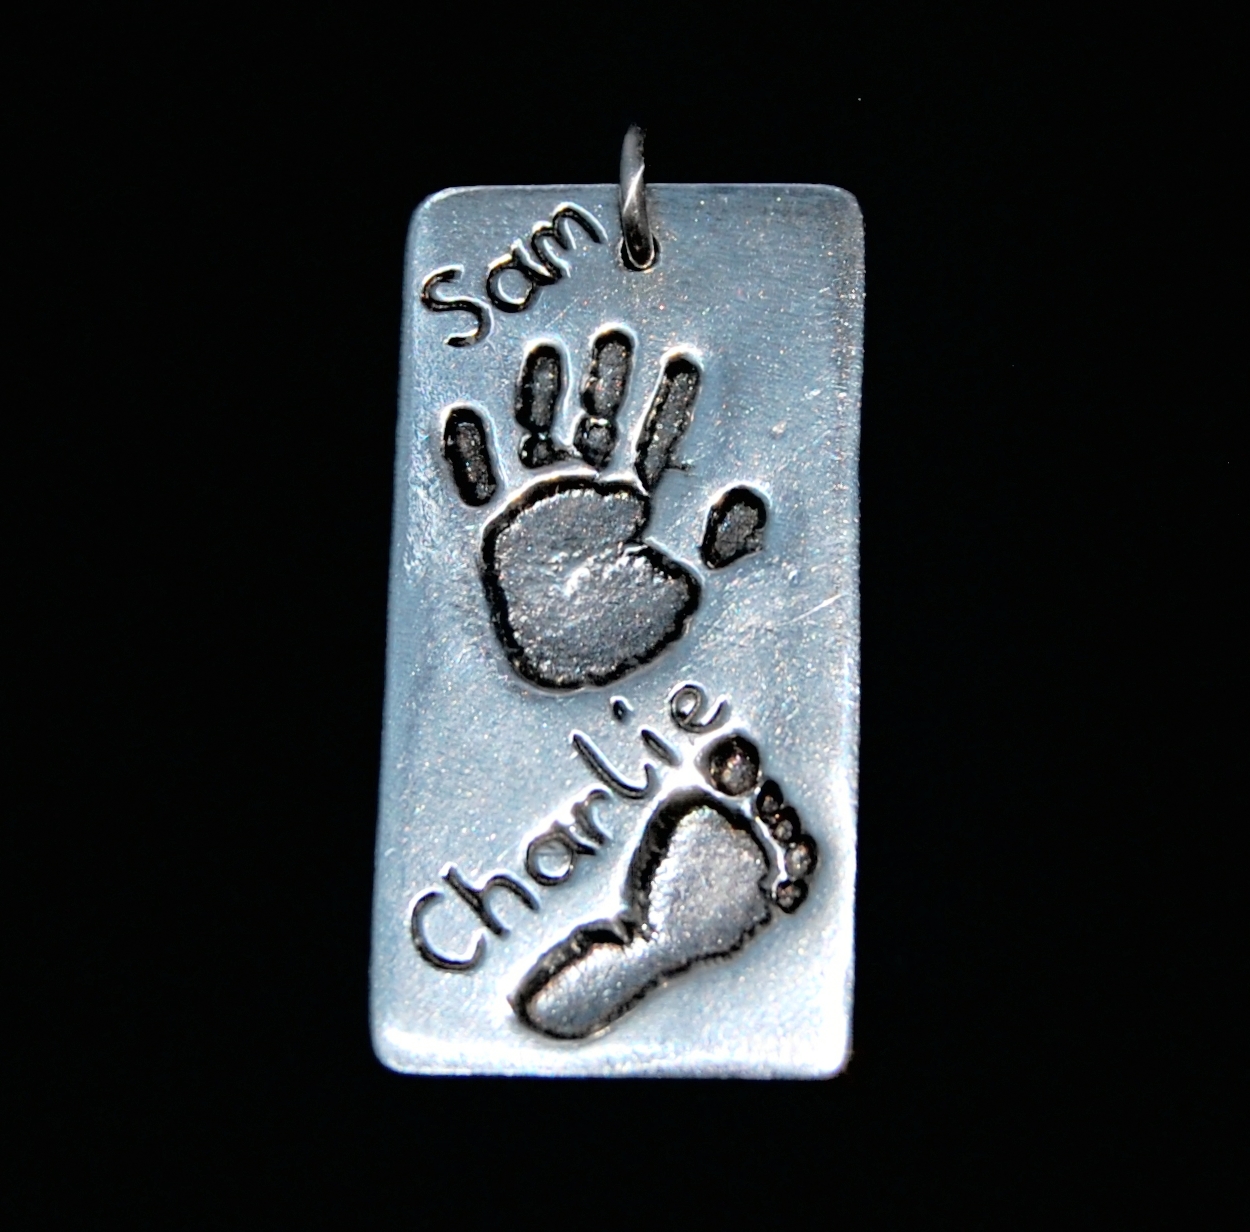 Large silver rectangle hand & footprint charm with names hand inscribed alongside the prints.